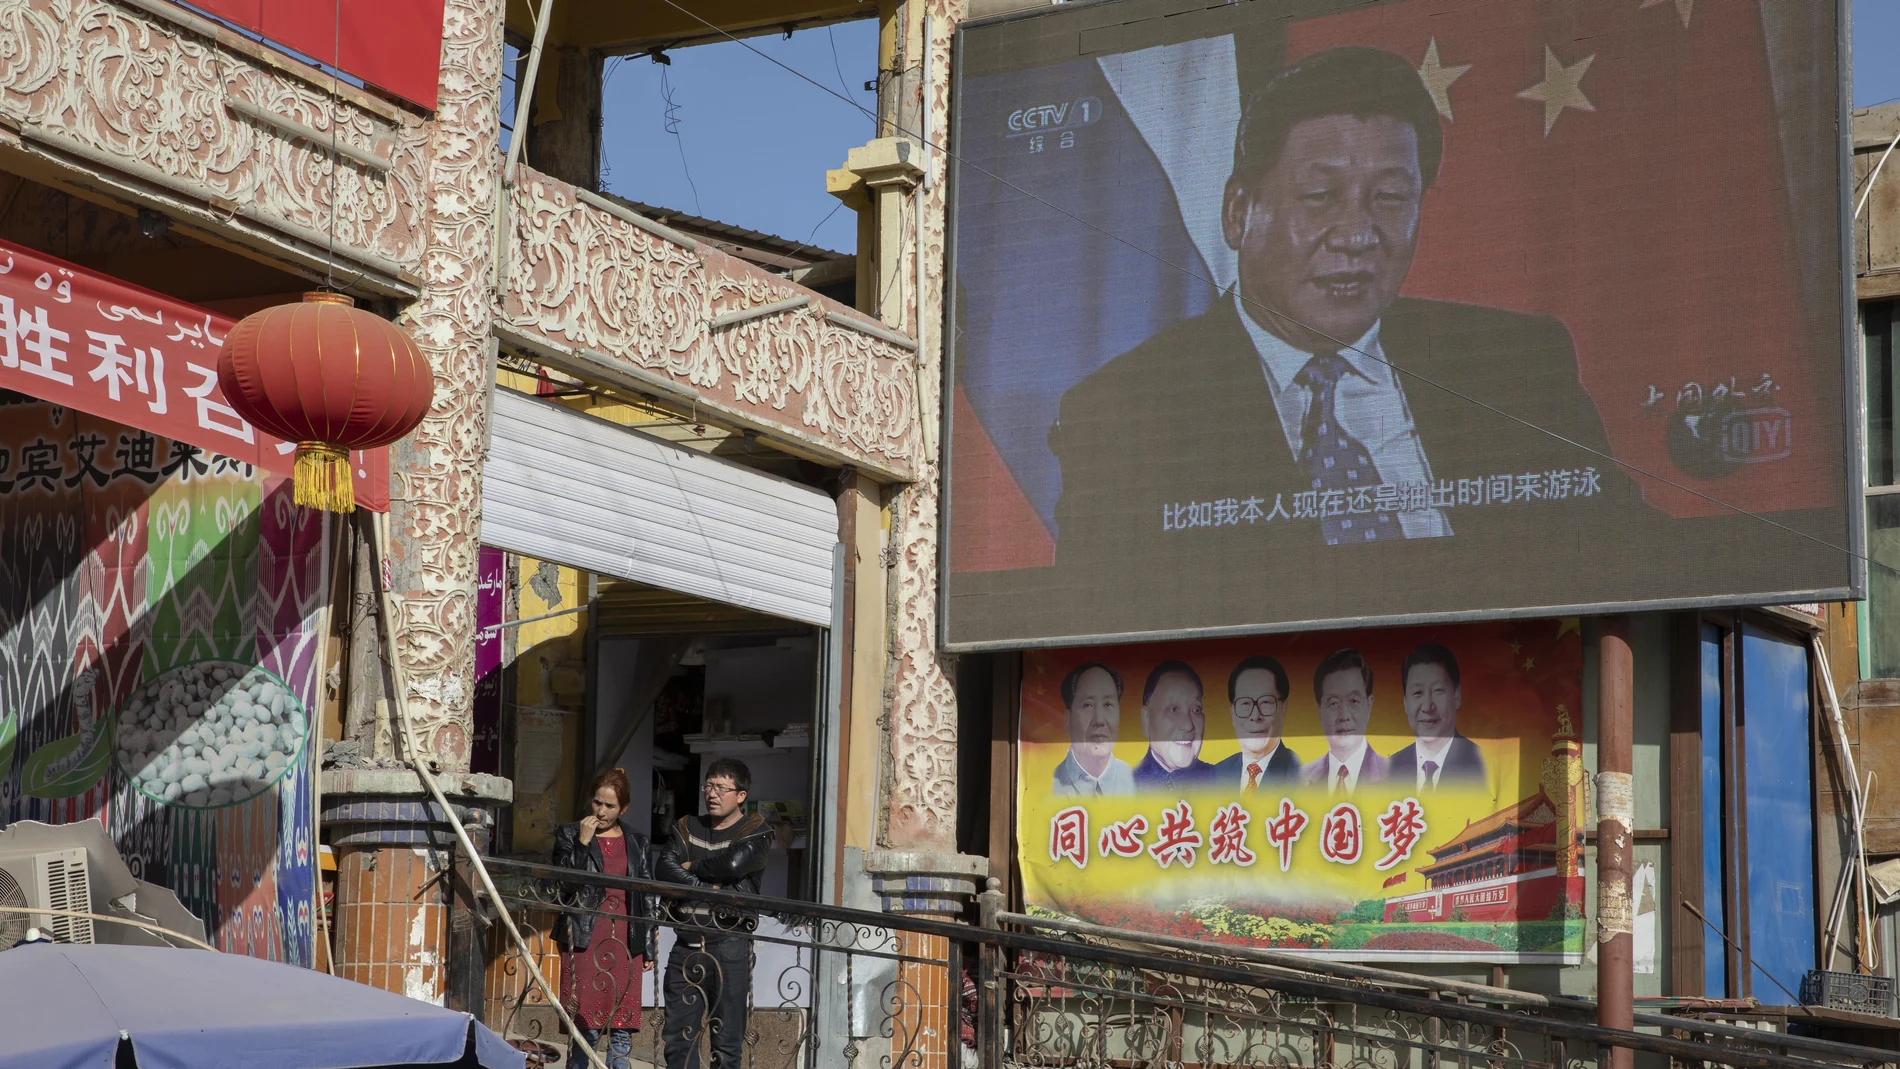 Chinese President Xi Jinping is seen on a screen near a bazaar in Hotan in western China's Xinjiang region, China, Friday, Nov. 3, 2017. The accusation of genocide by U.S. Secretary of State Mike Pompeo against China touches on a hot-button human rights issue between China and the West. (AP Photo/Ng Han Guan)